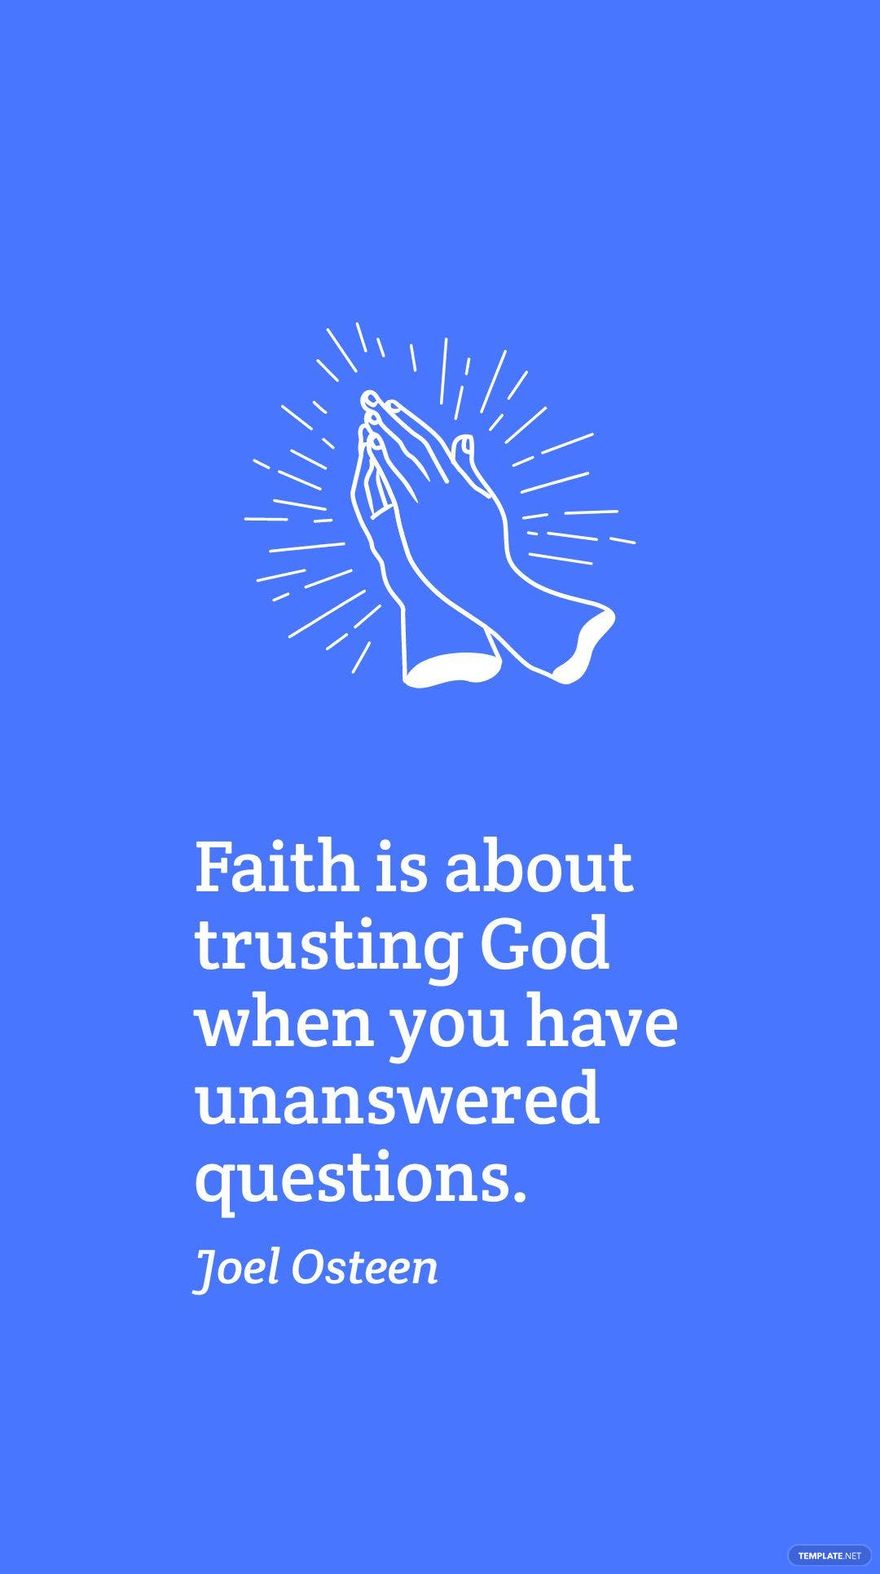 Free Joel Osteen - Faith is about trusting God when you have unanswered questions. in JPG